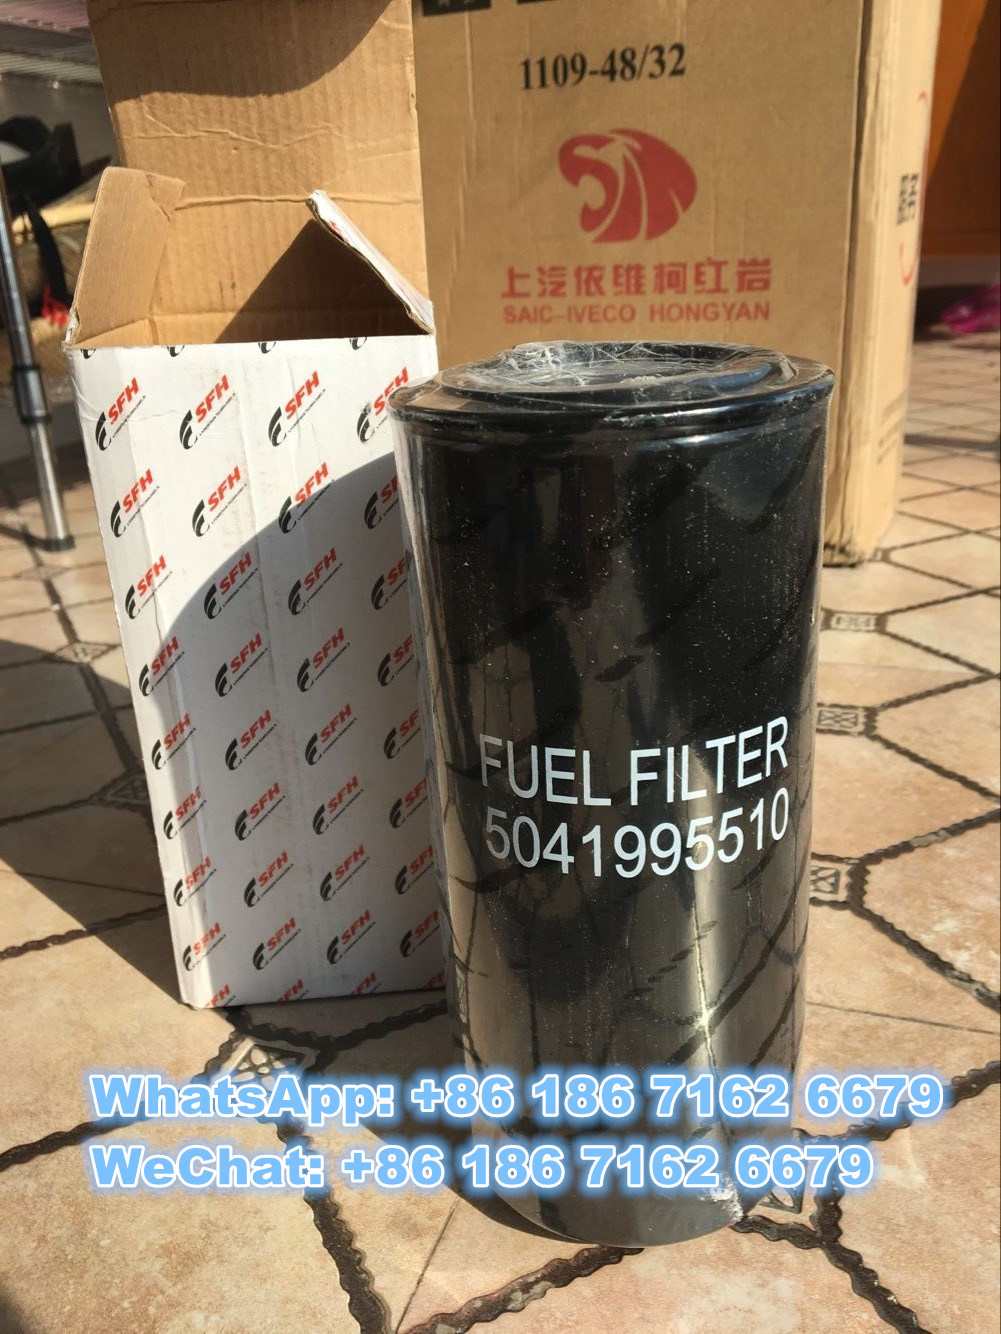 High Quality Iveco Hongyan Genlyon Truck Spare Parts Fuel Fine Filters Diesel Filters 5041995510 for FIAT